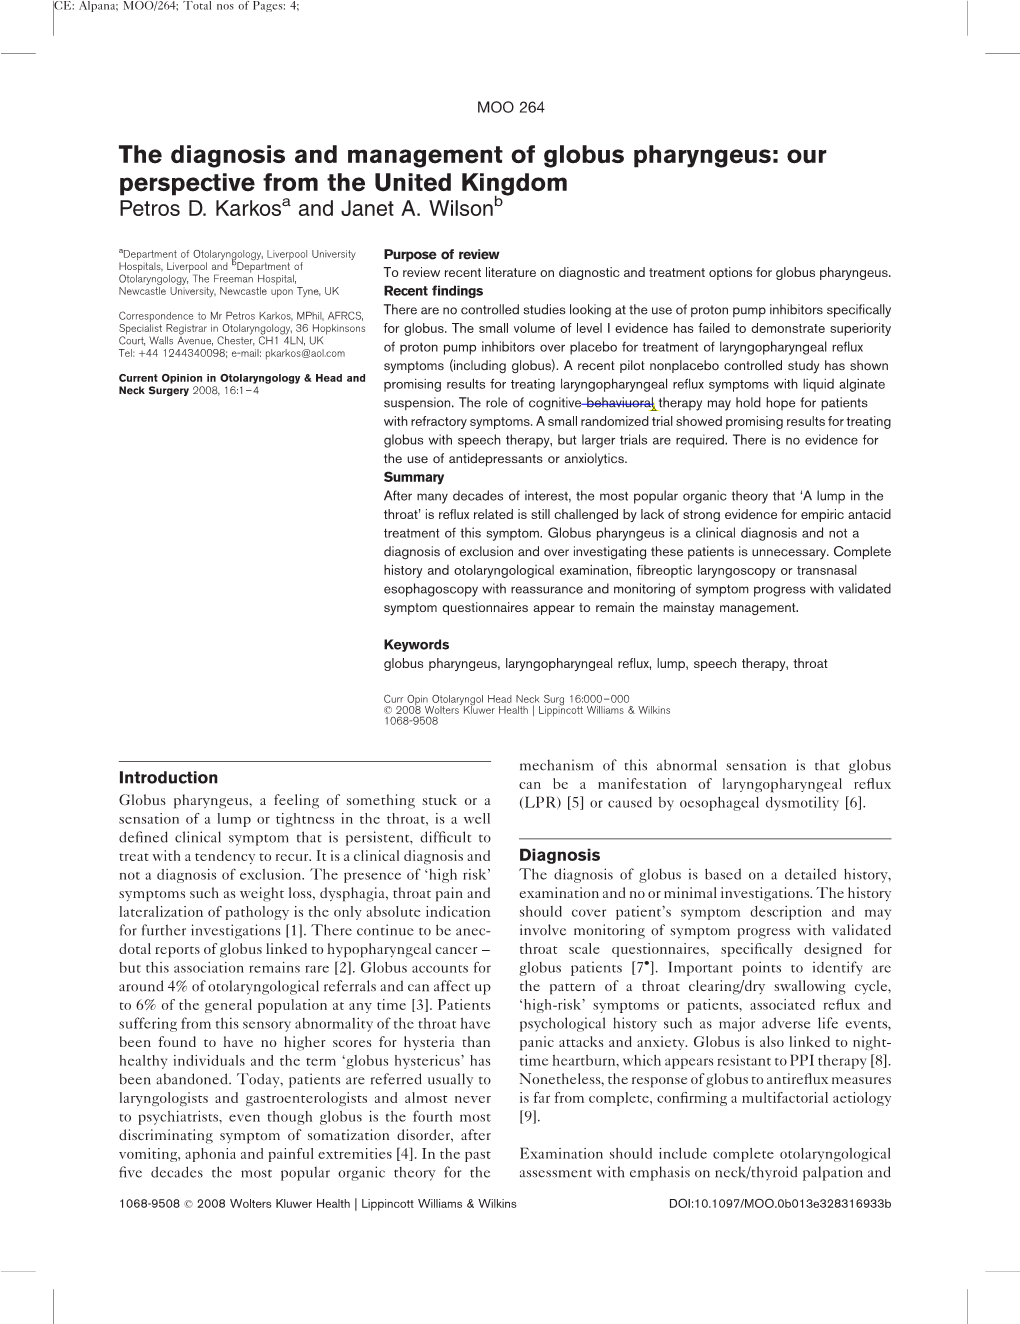 The Diagnosis and Management of Globus Pharyngeus: Our Perspective from the United Kingdom Petros D